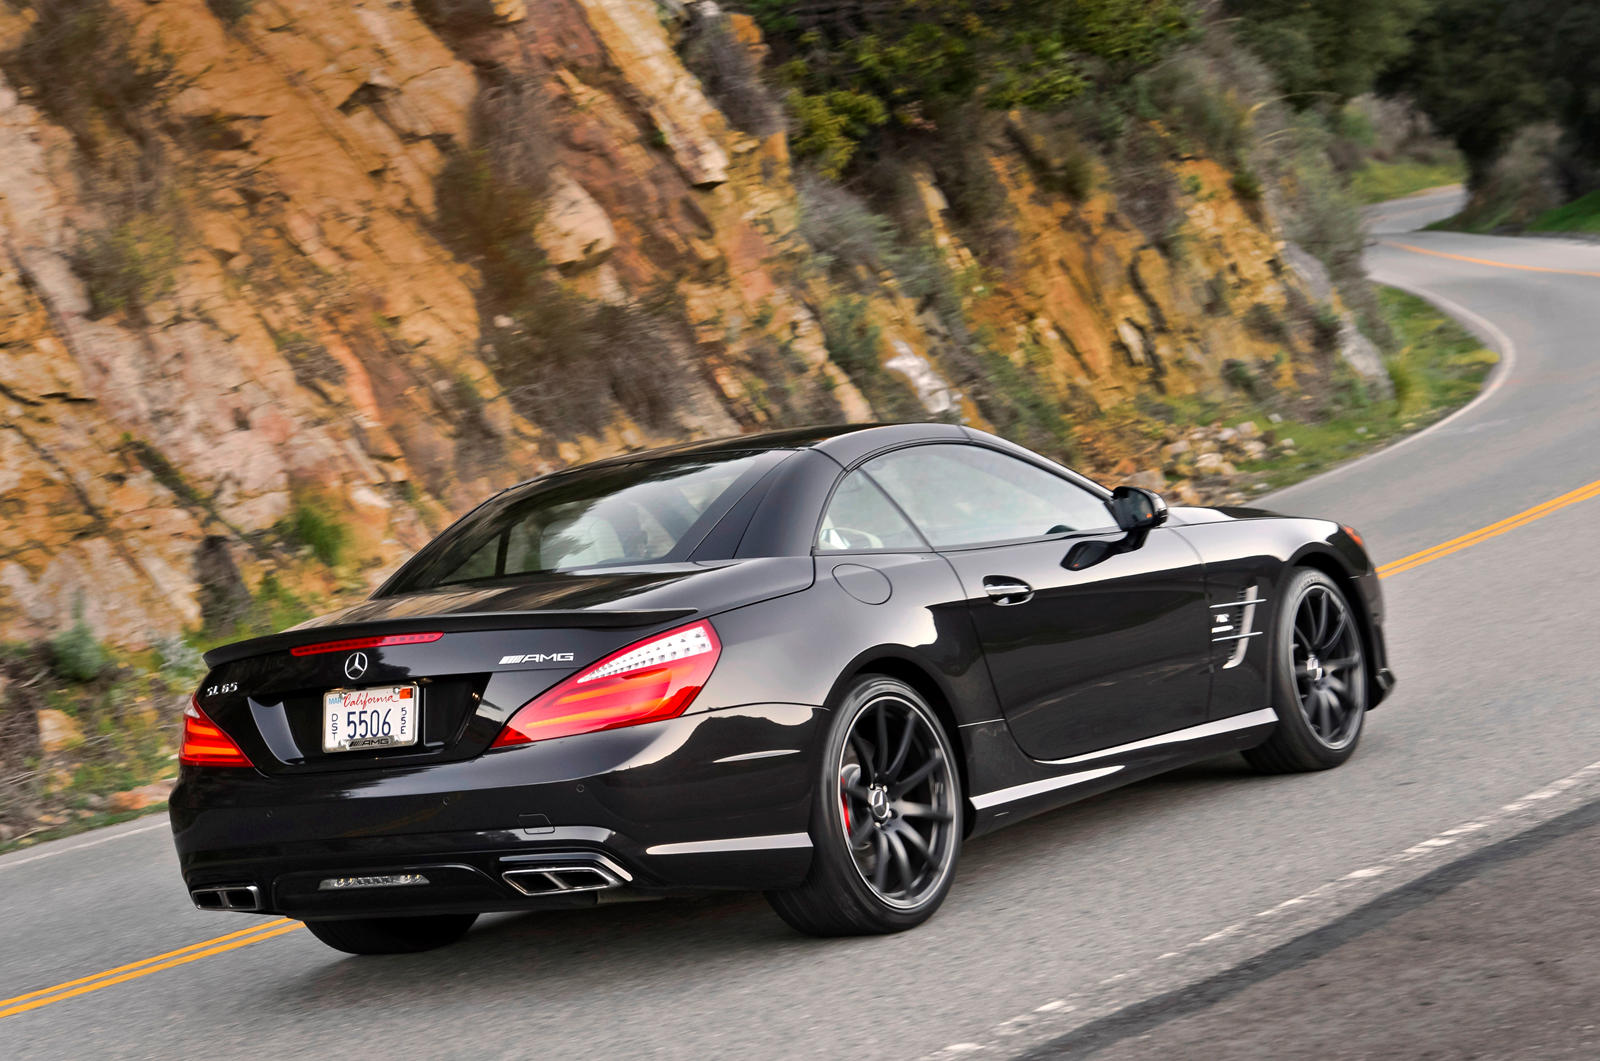 Mercedes Benz SL65 AMG Specs And Price Of Mercedes Benz SL65 AMG